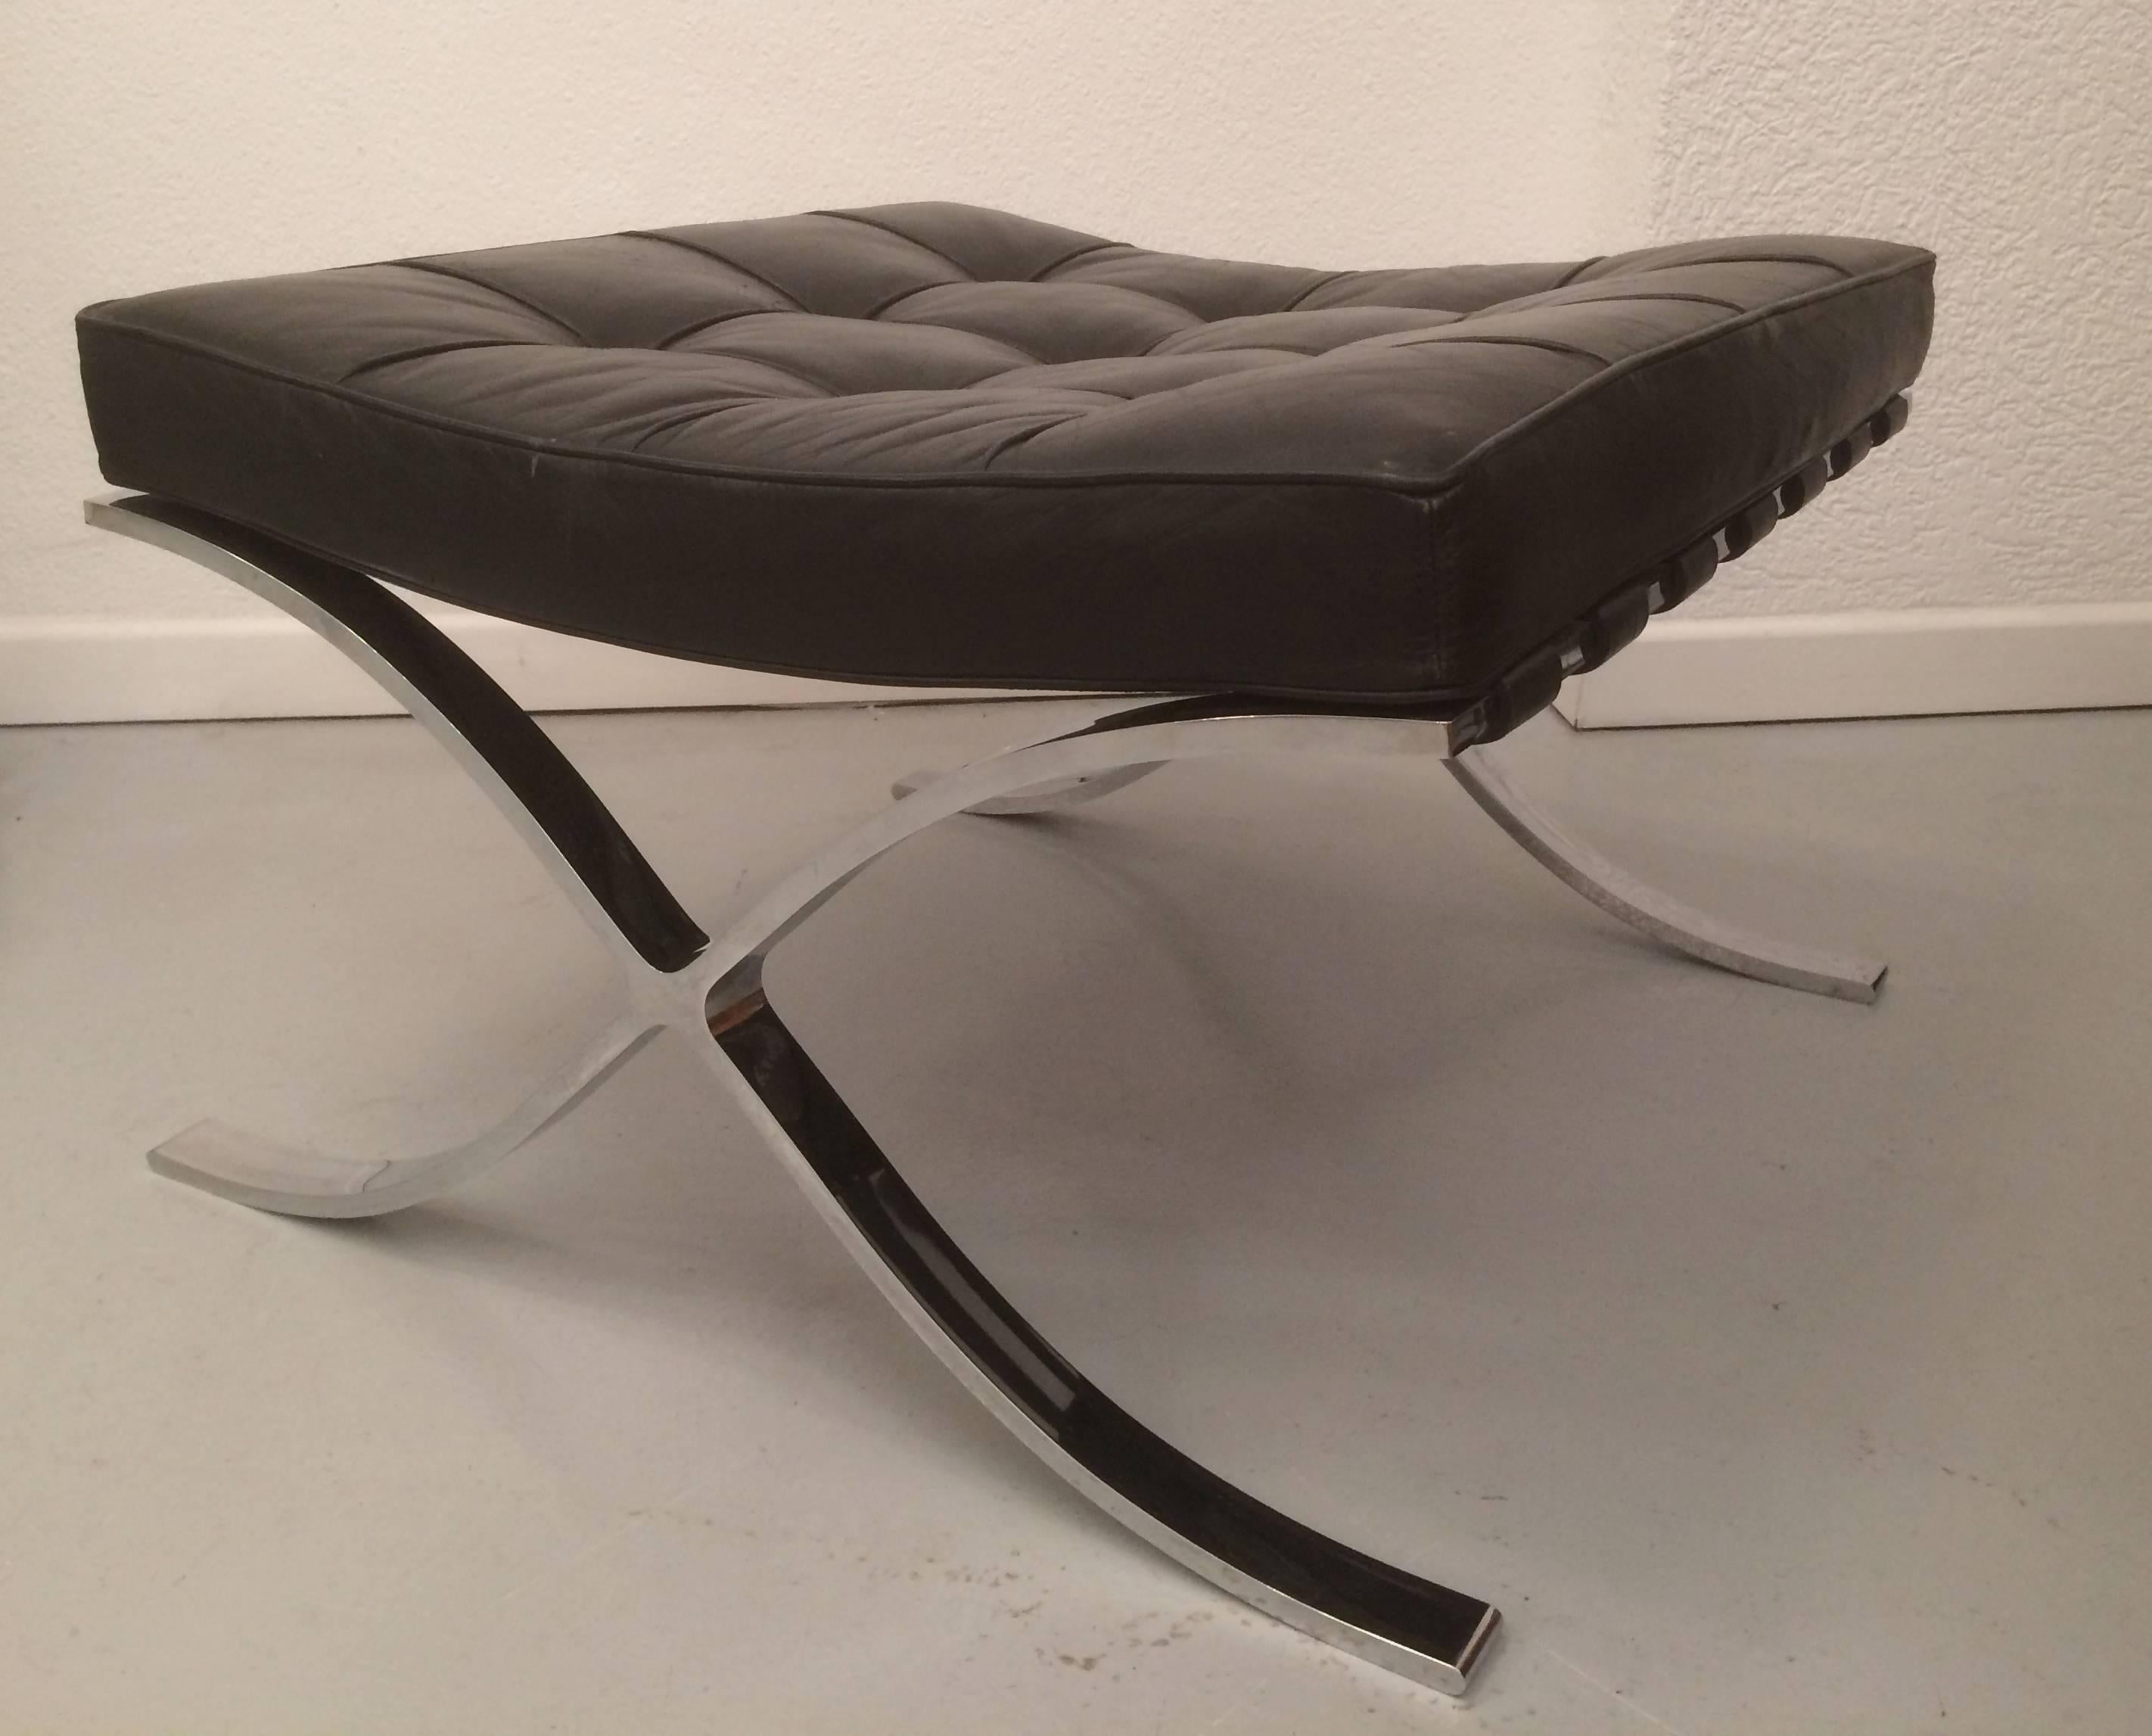 Vintage Barcelona black leather stool signed Knoll under the cushion
By Mies van der Rohe, Knoll edition
Very good condition.